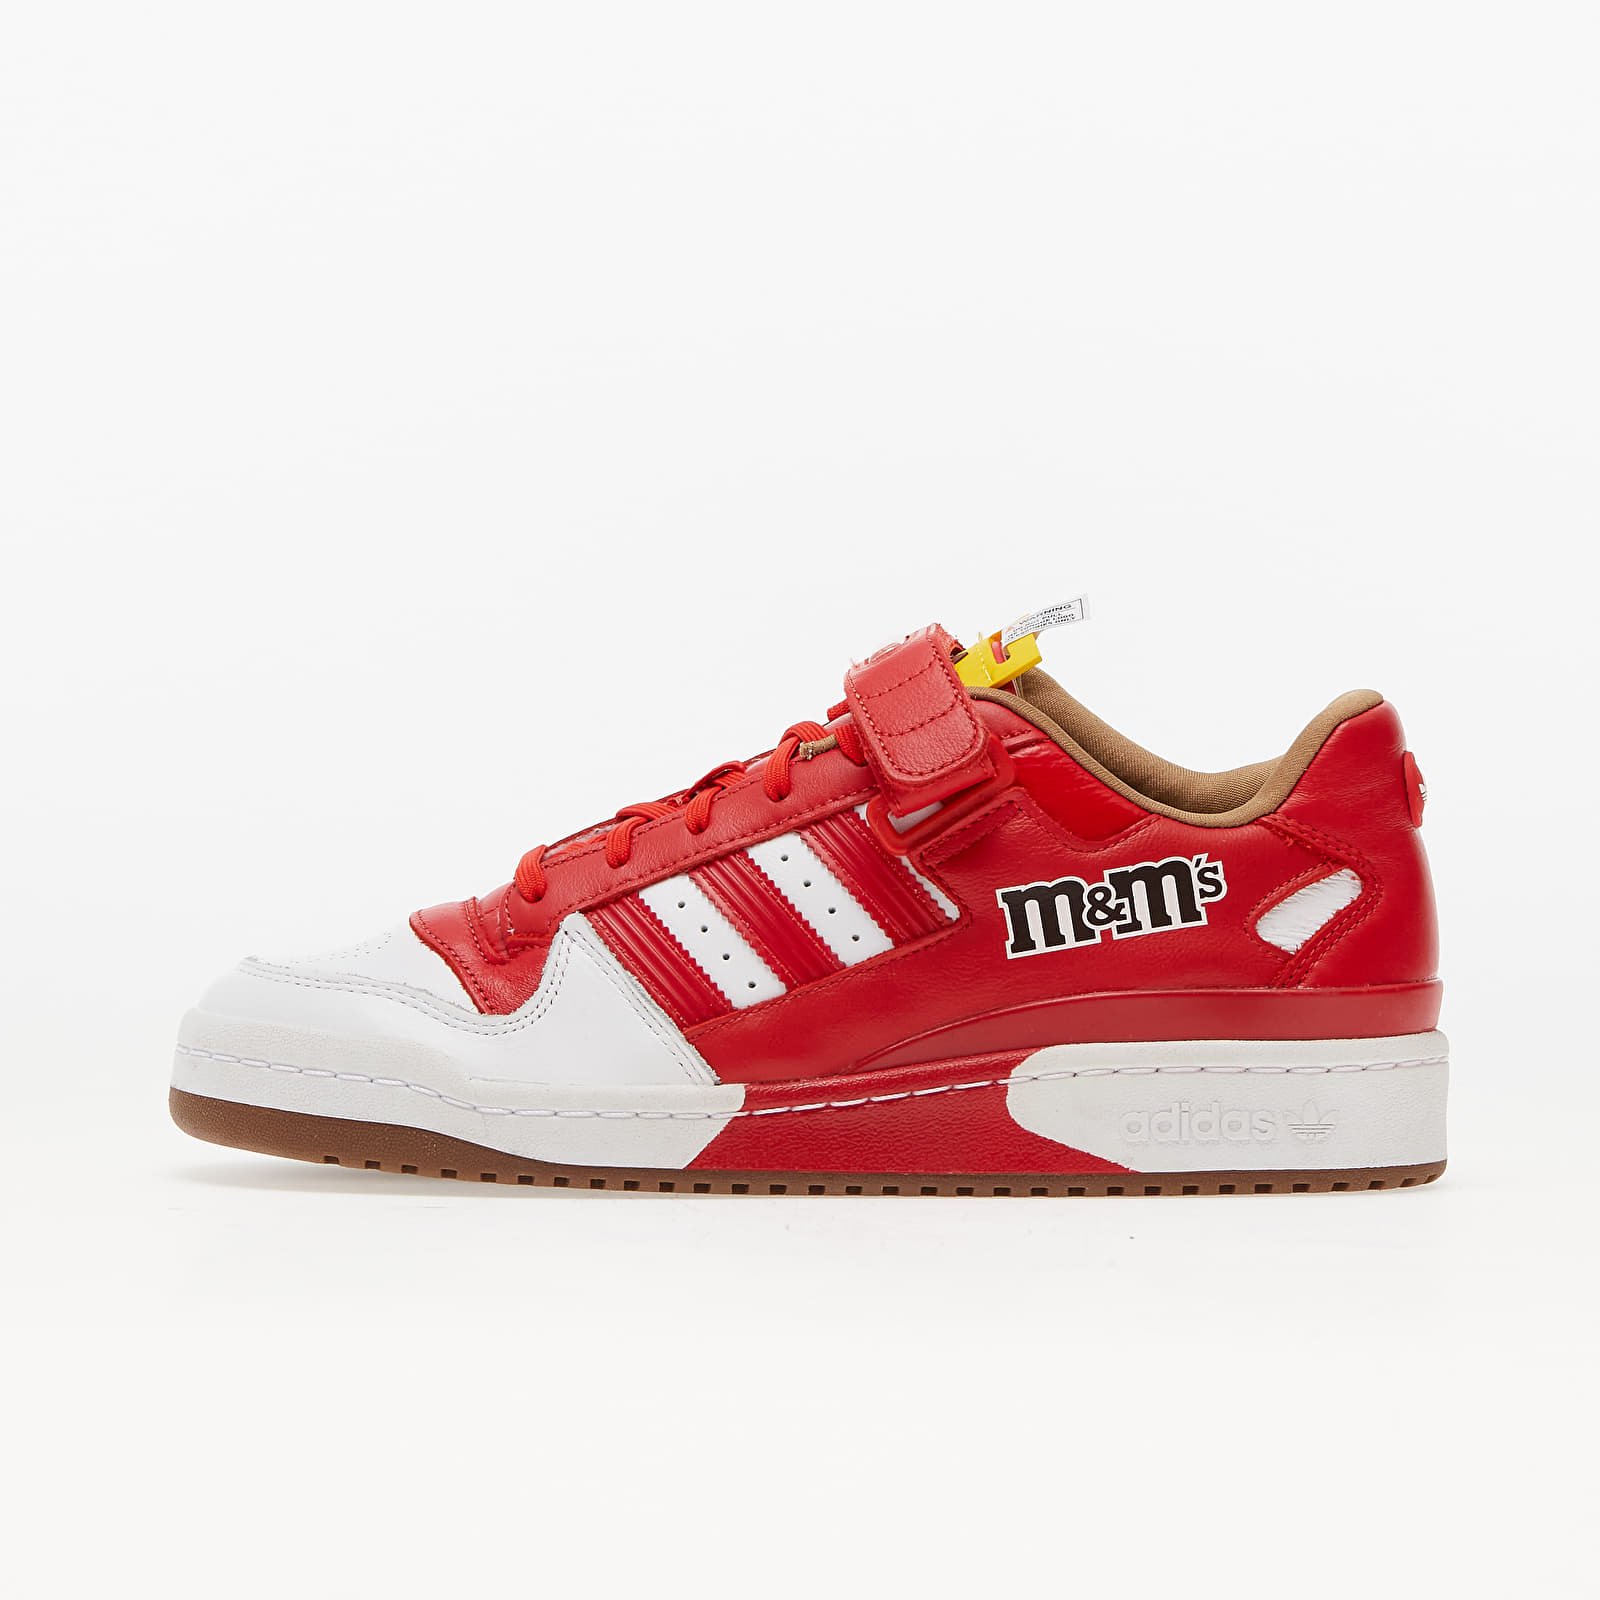 Pánske tenisky a topánky adidas x M&M's Forum Lo 84 Red/ Red/ Eqt Yellow